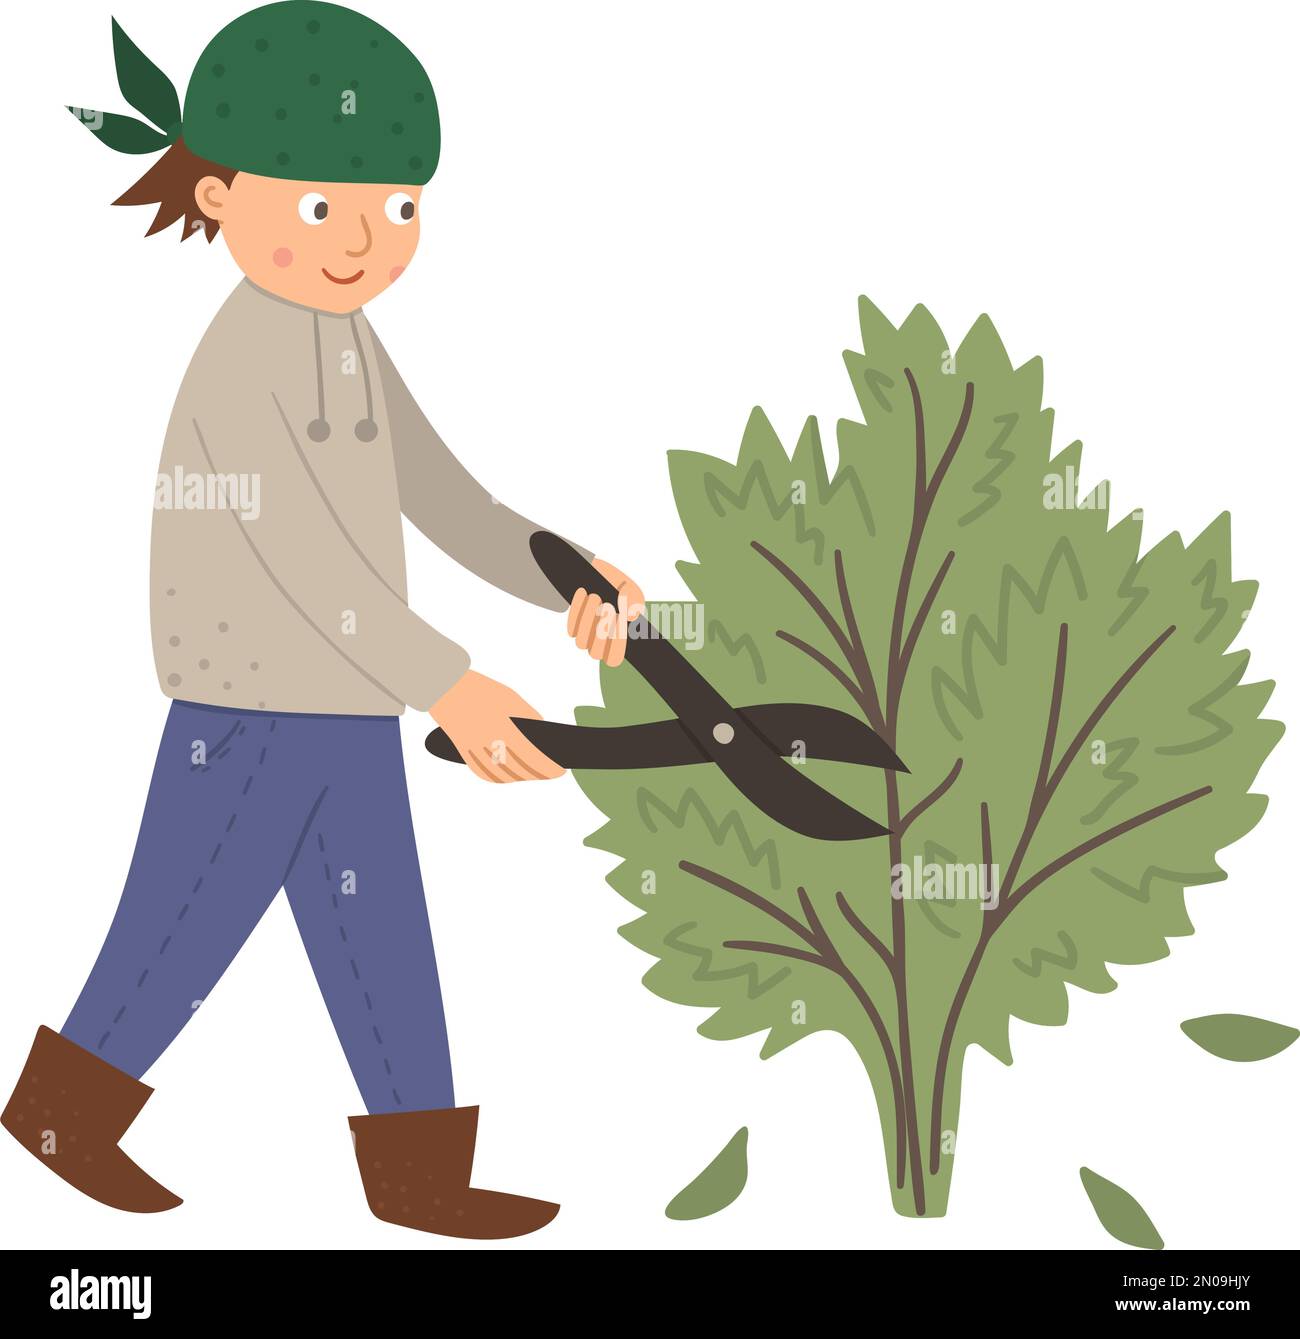 Vector illustration of a boy pruning bush with shears isolated on white background. Cute kid doing garden work. Spring gardening activity picture with Stock Vector